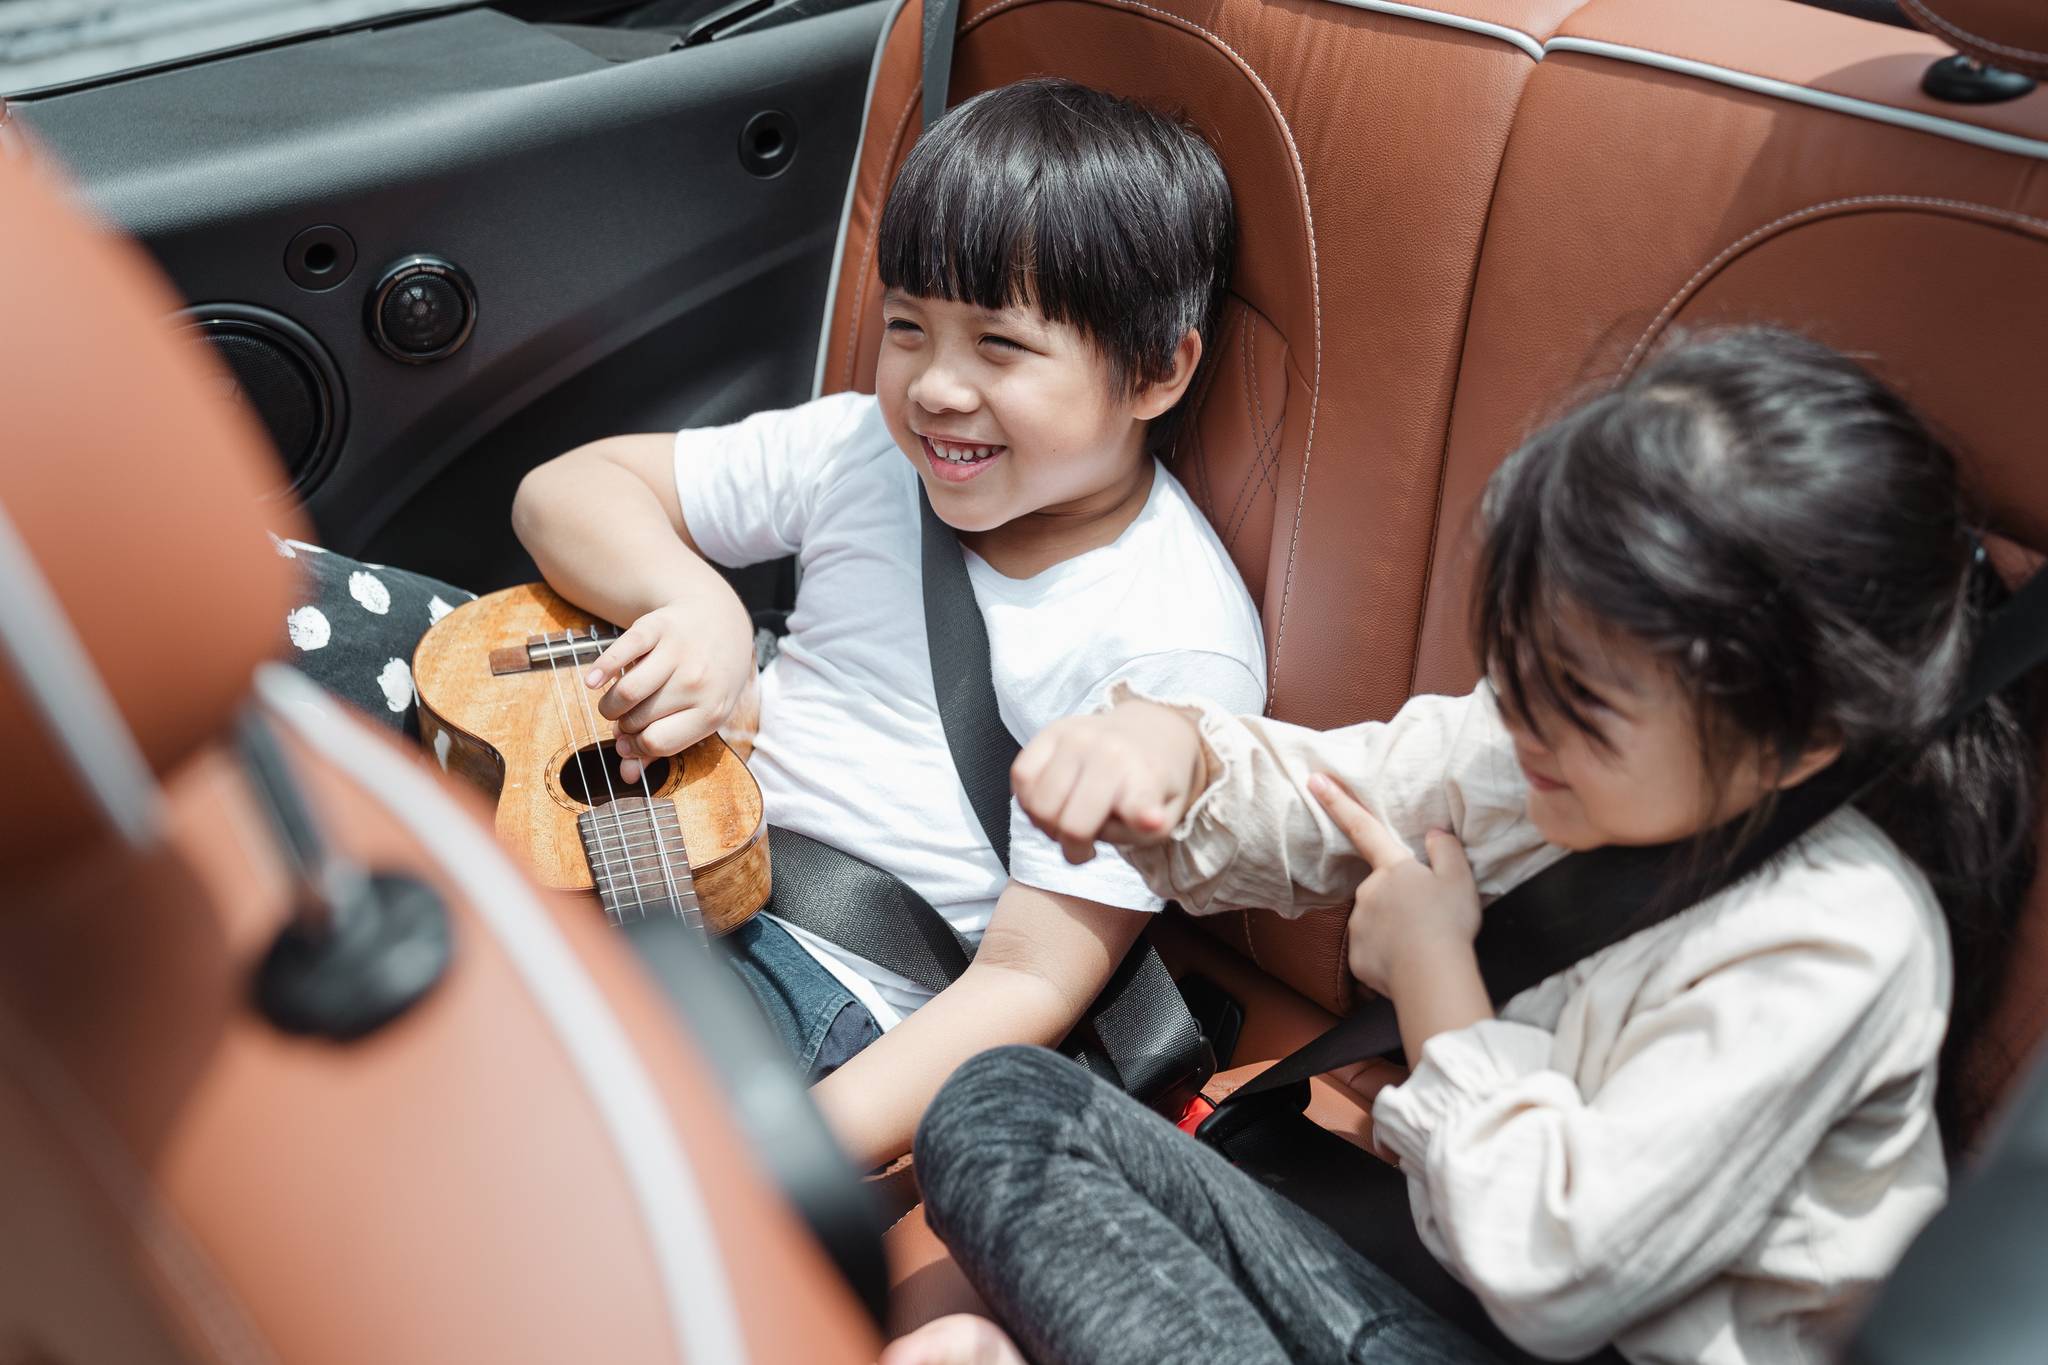 Kidcaboo eases child safety concerns for working mothers